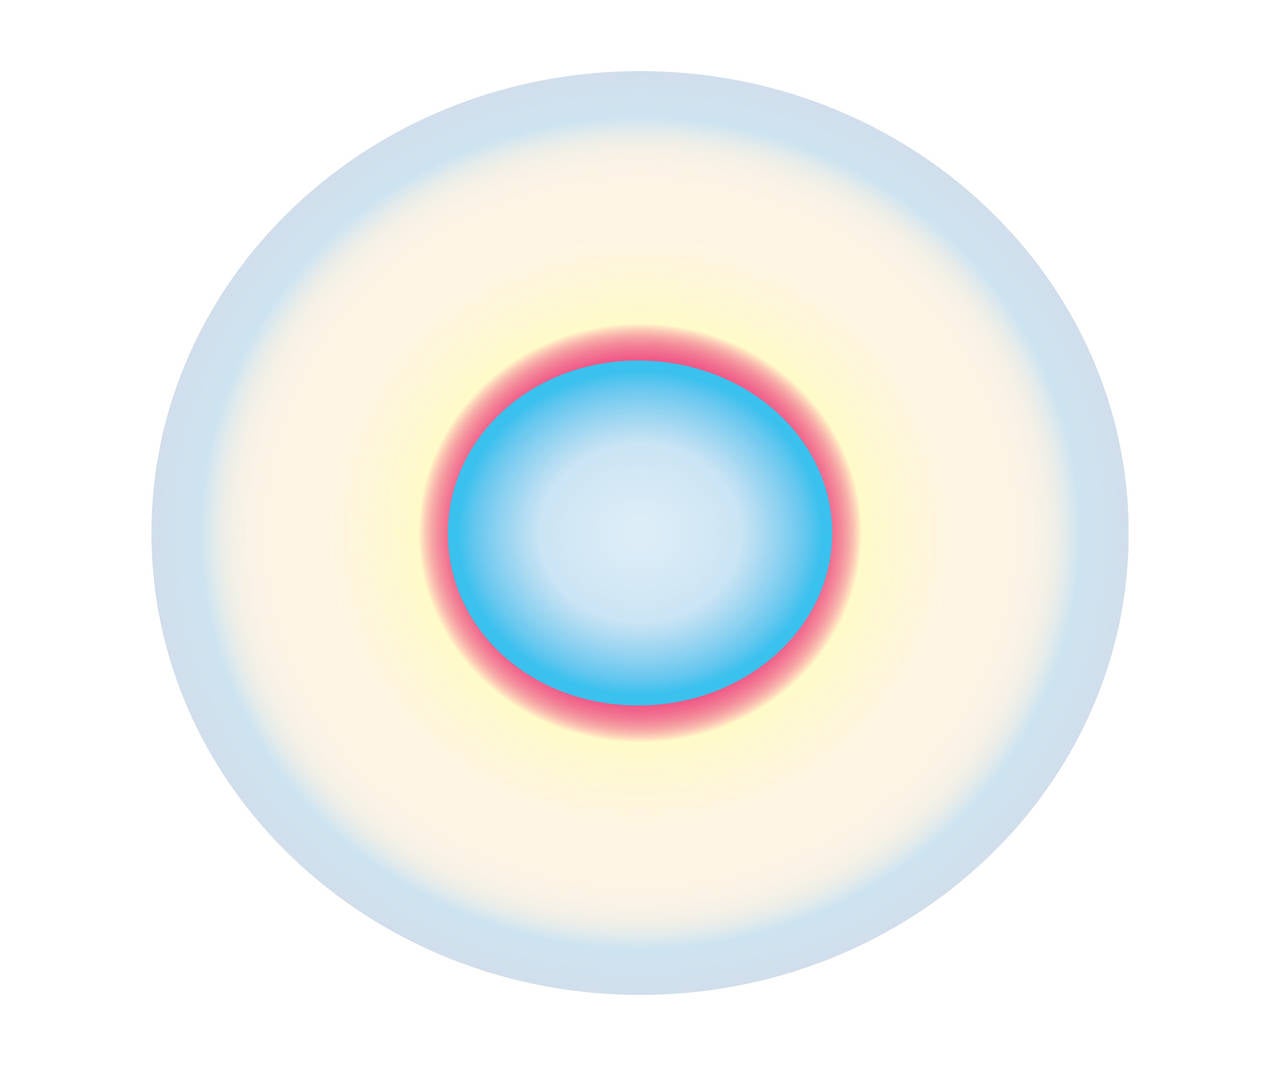 Ruth Adler Abstract Print - Blue to Light Blue Circle